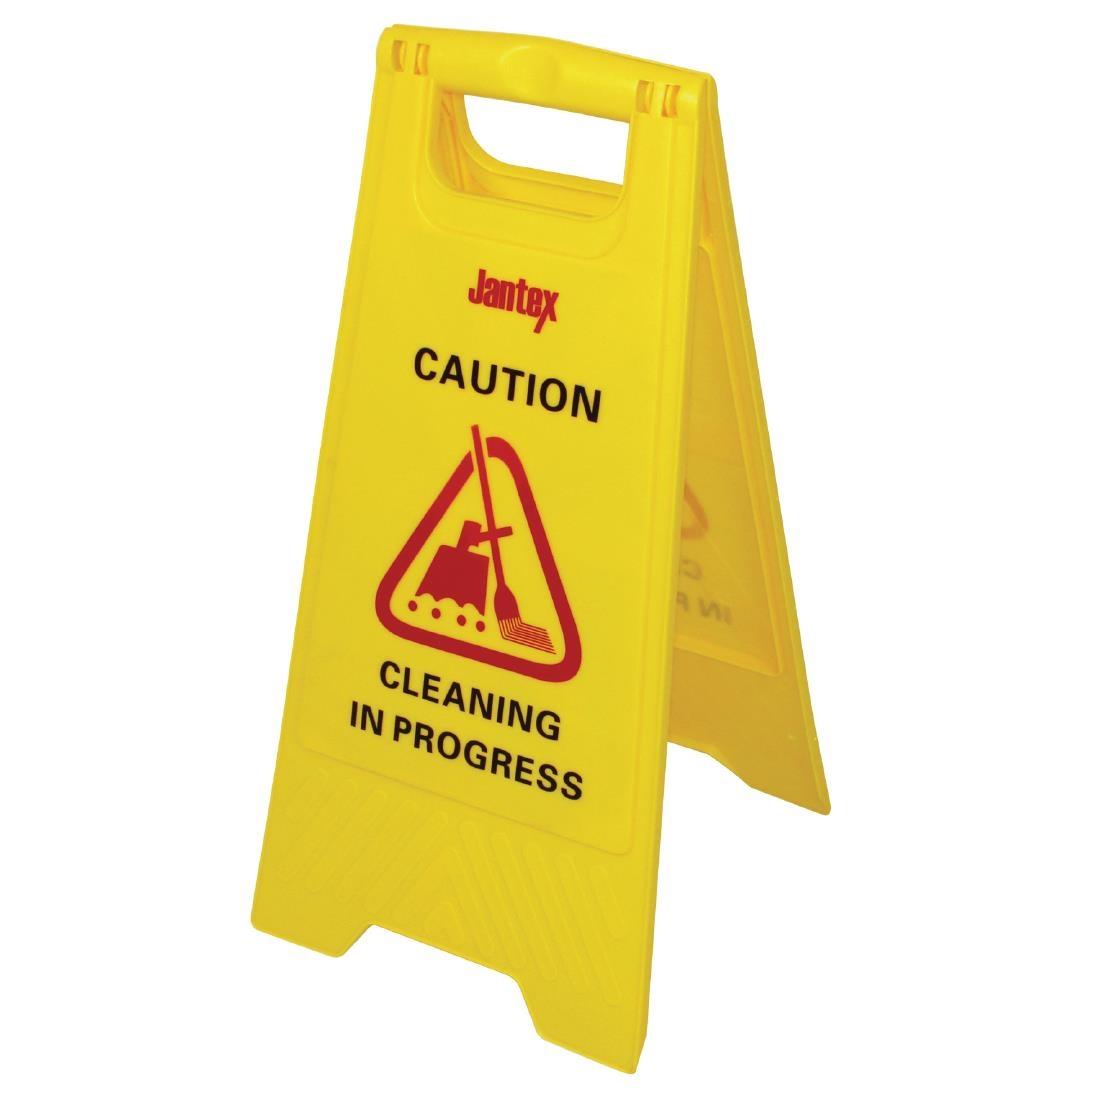 Jantex Cleaning in Progress Safety Sign - L433  - 1